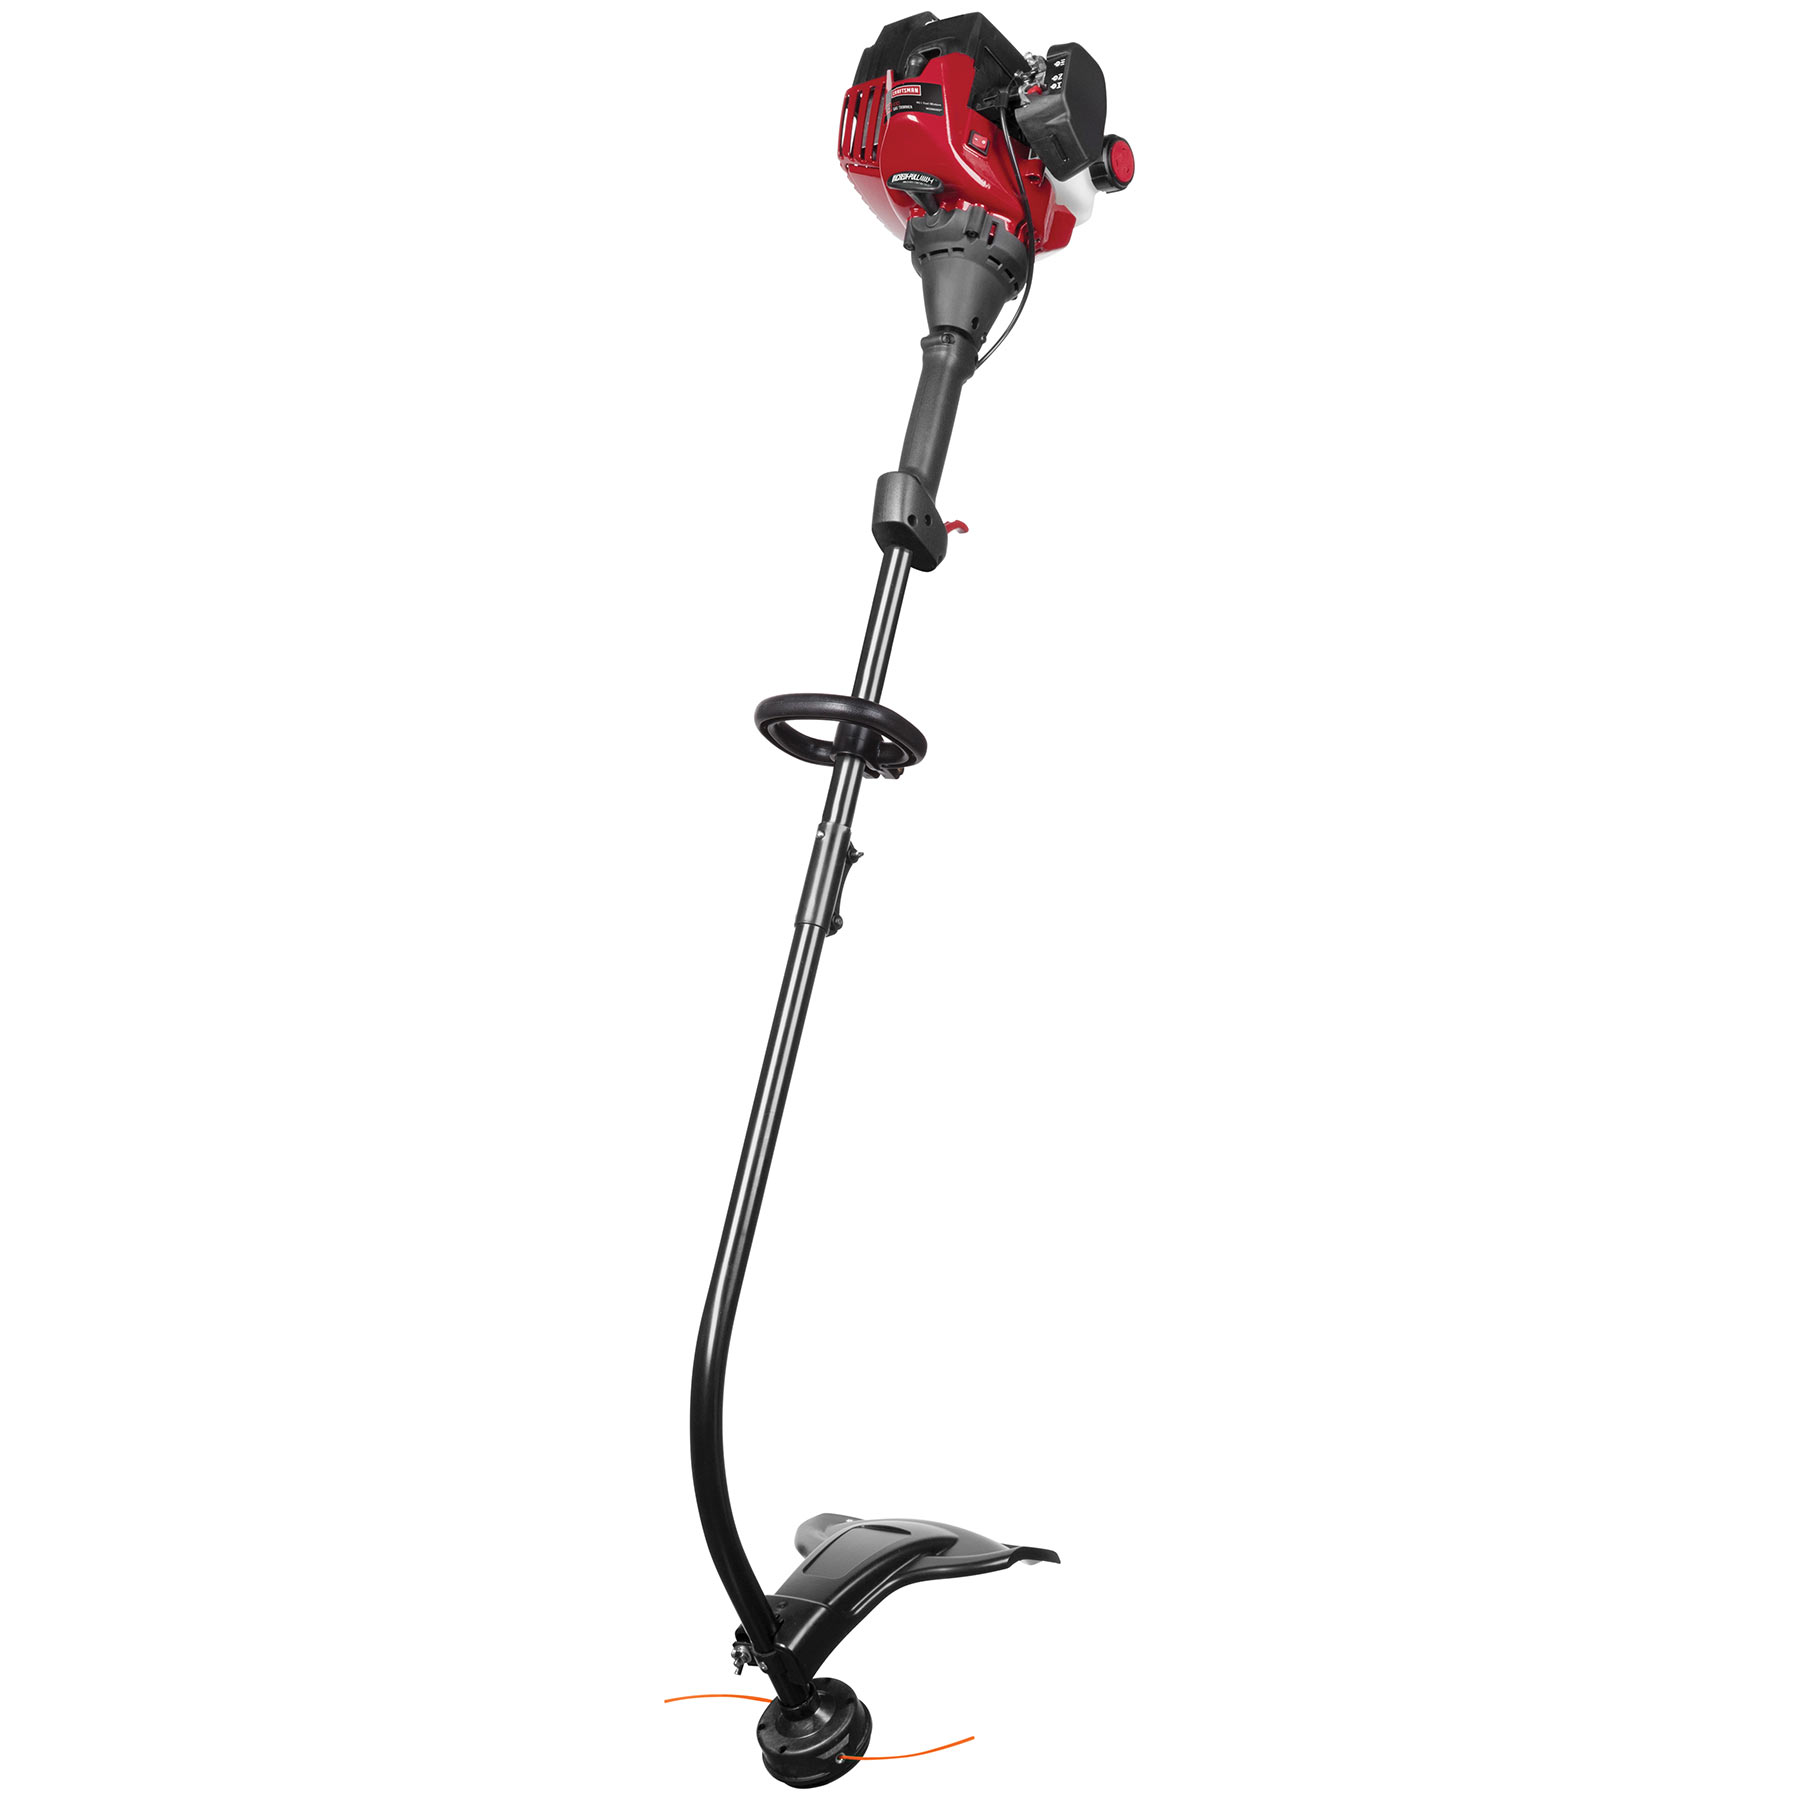 Craftsman 79437 25cc 2-Cycle Curved Shaft Gas Trimmer/Edger